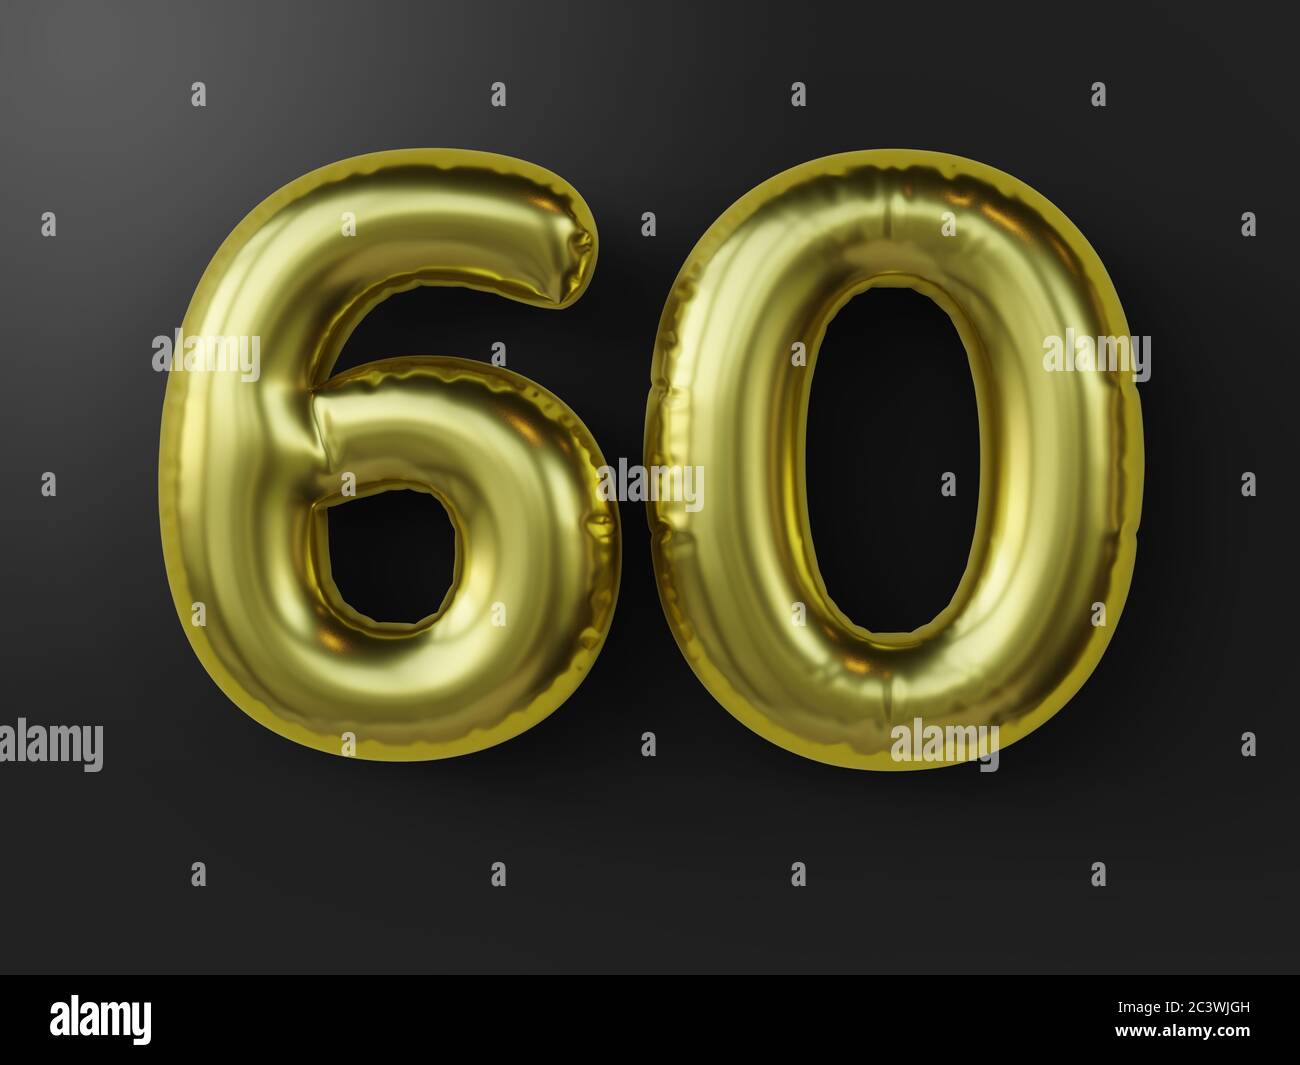 Golden balloon in shape of number 60  isolated. 3d illustration. Stock Photo